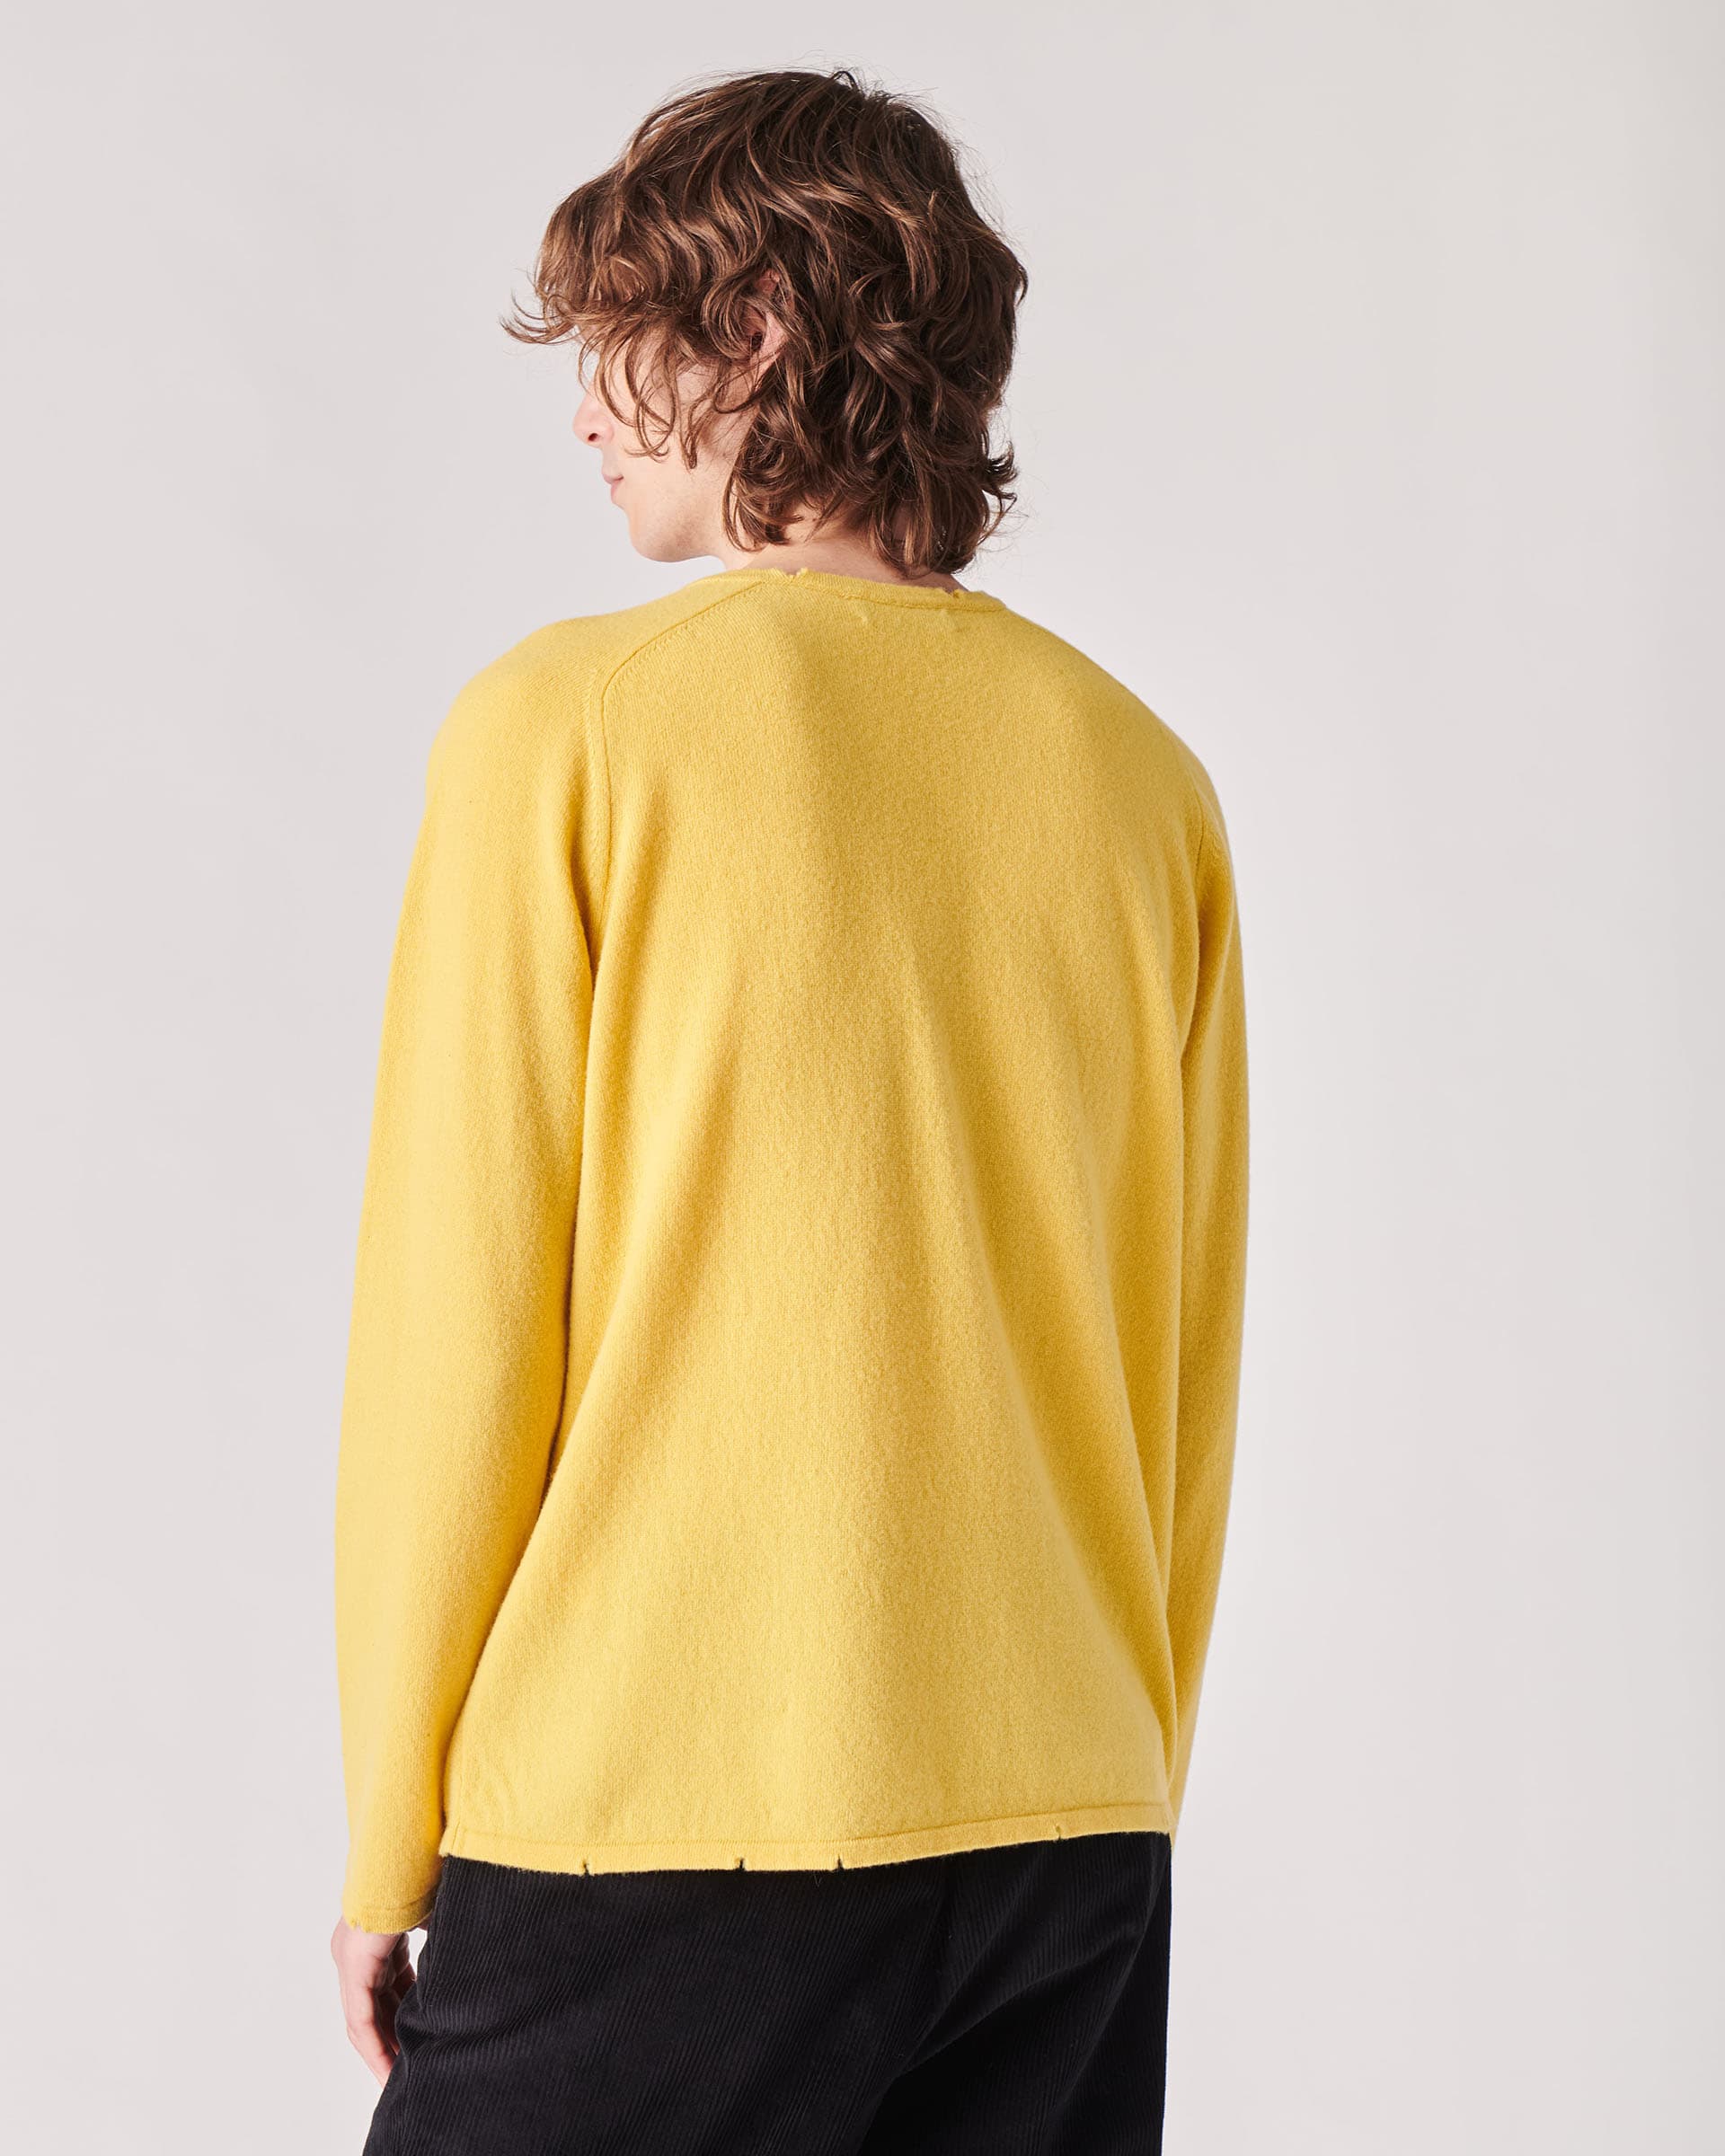 The Market Store | Crew Neck Sweater Without Breaks